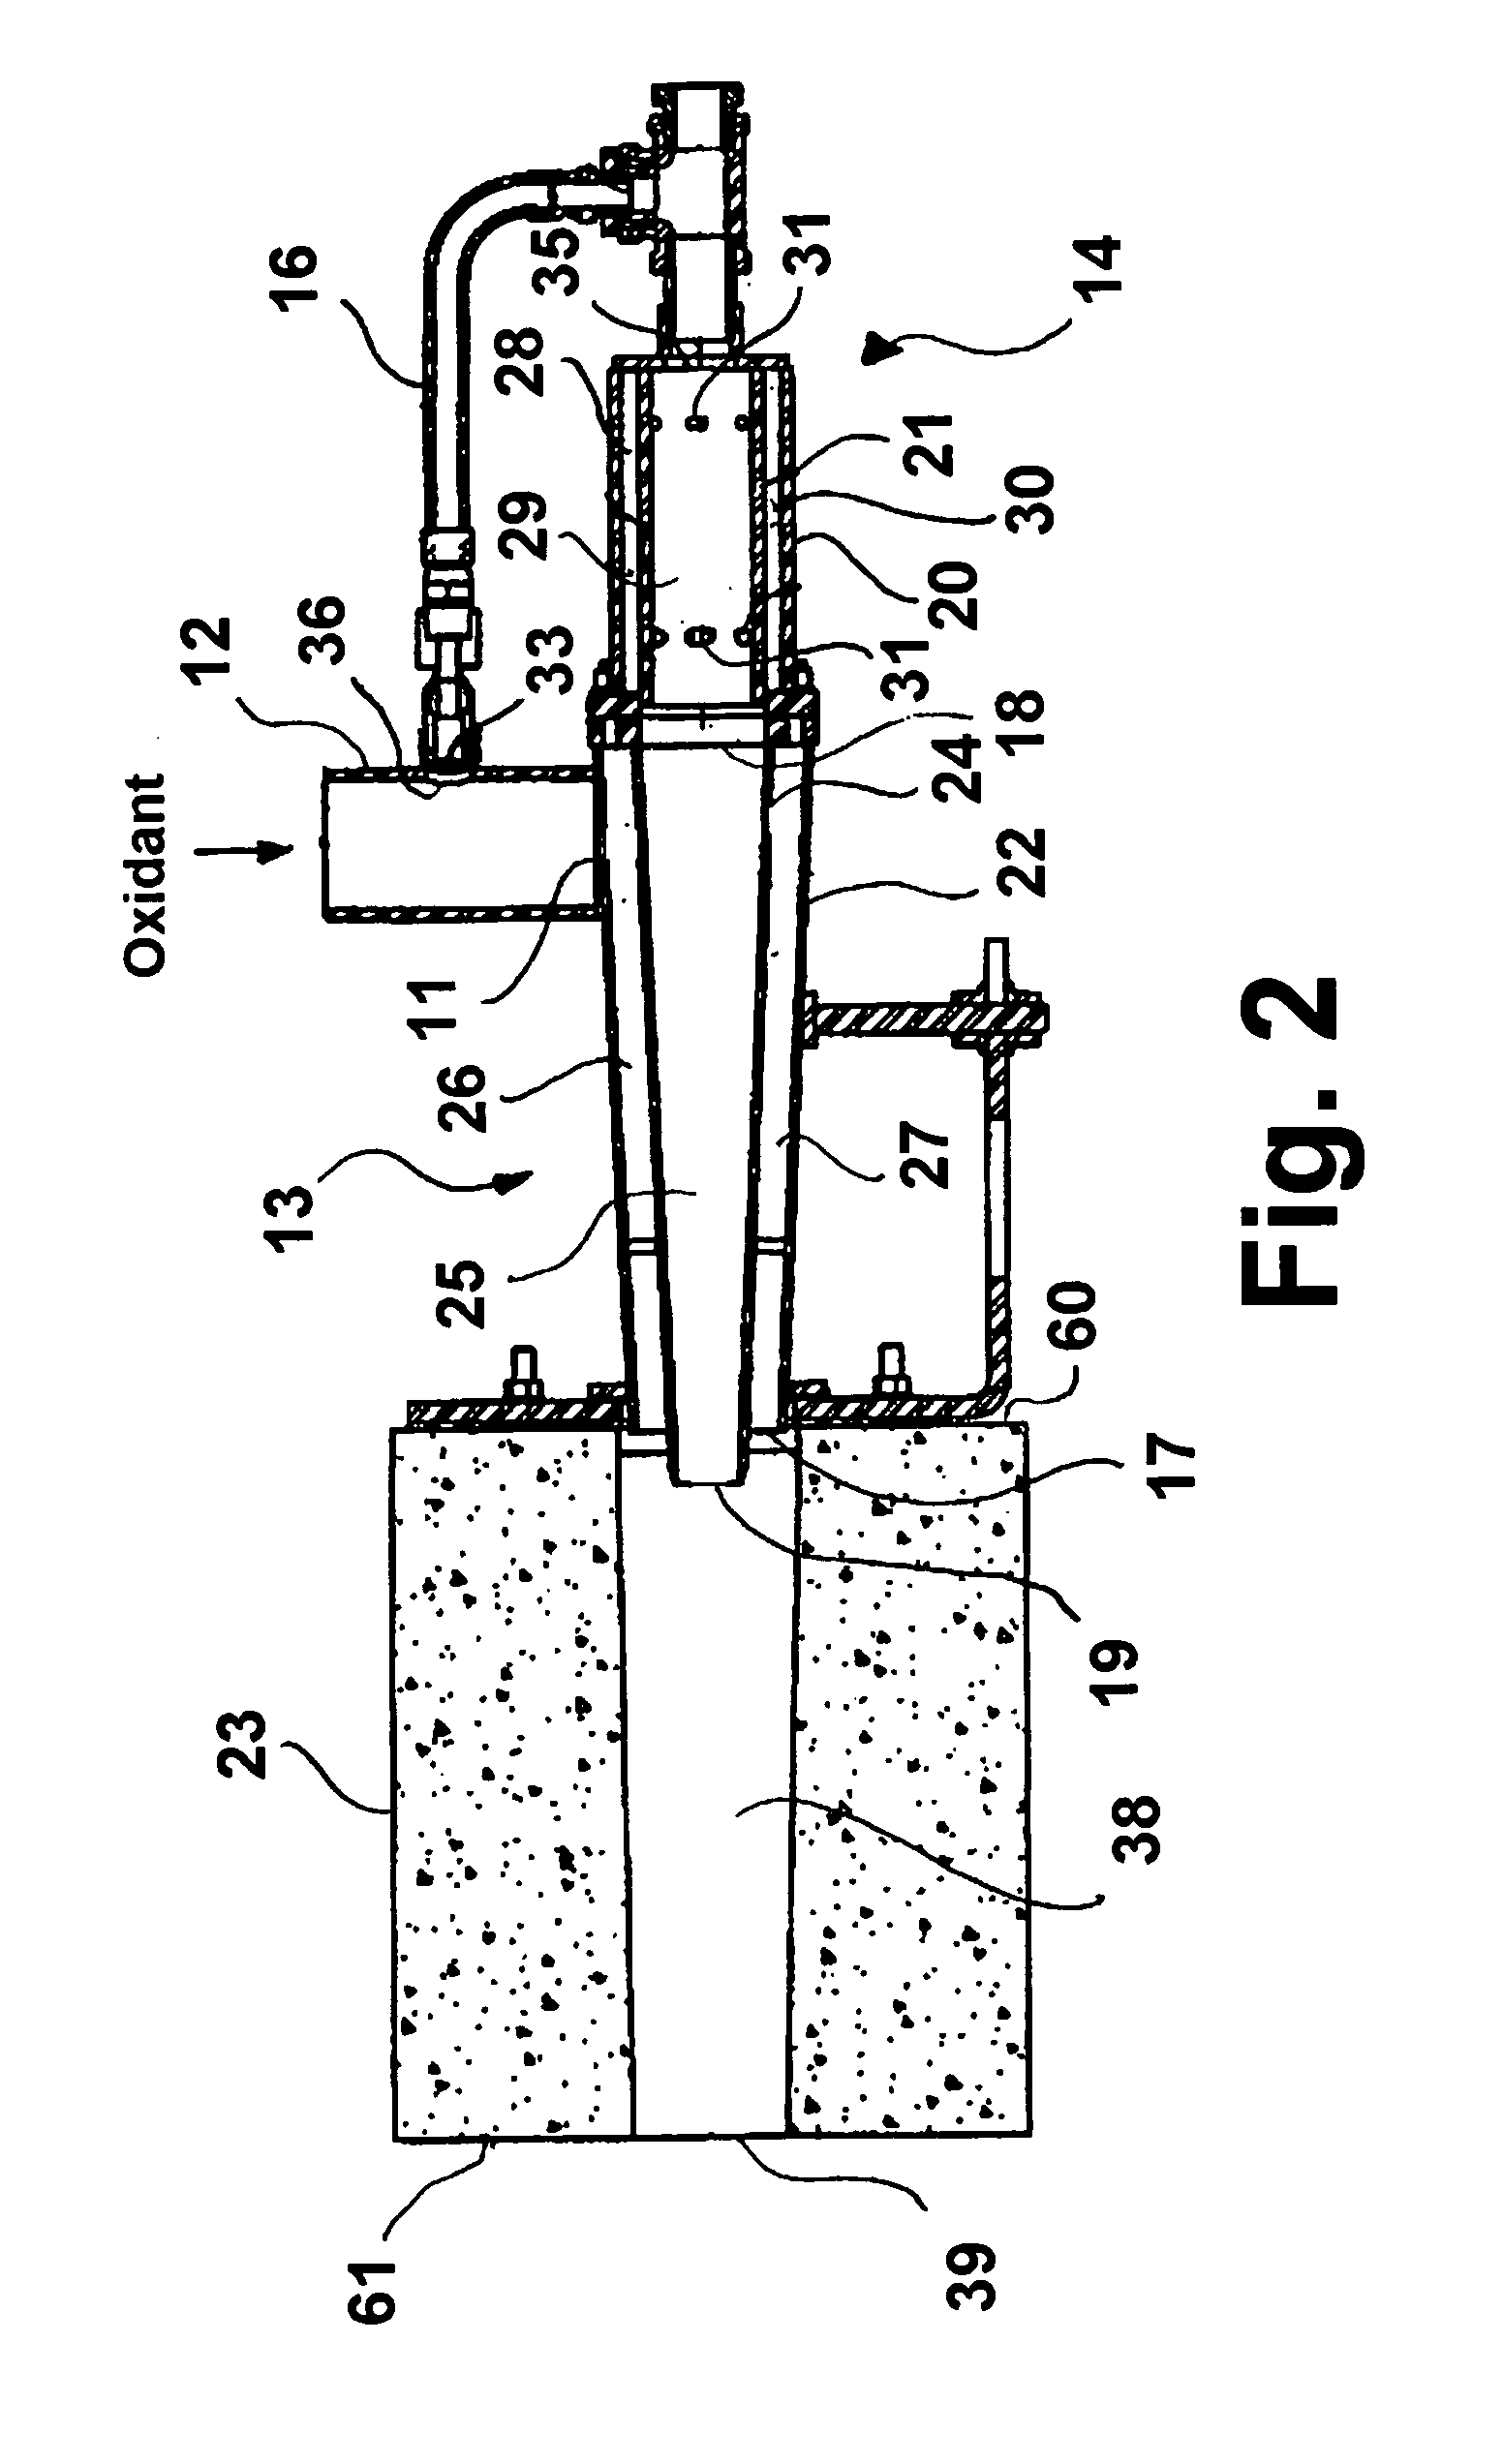 High-heat transfer low-NOx combustion system